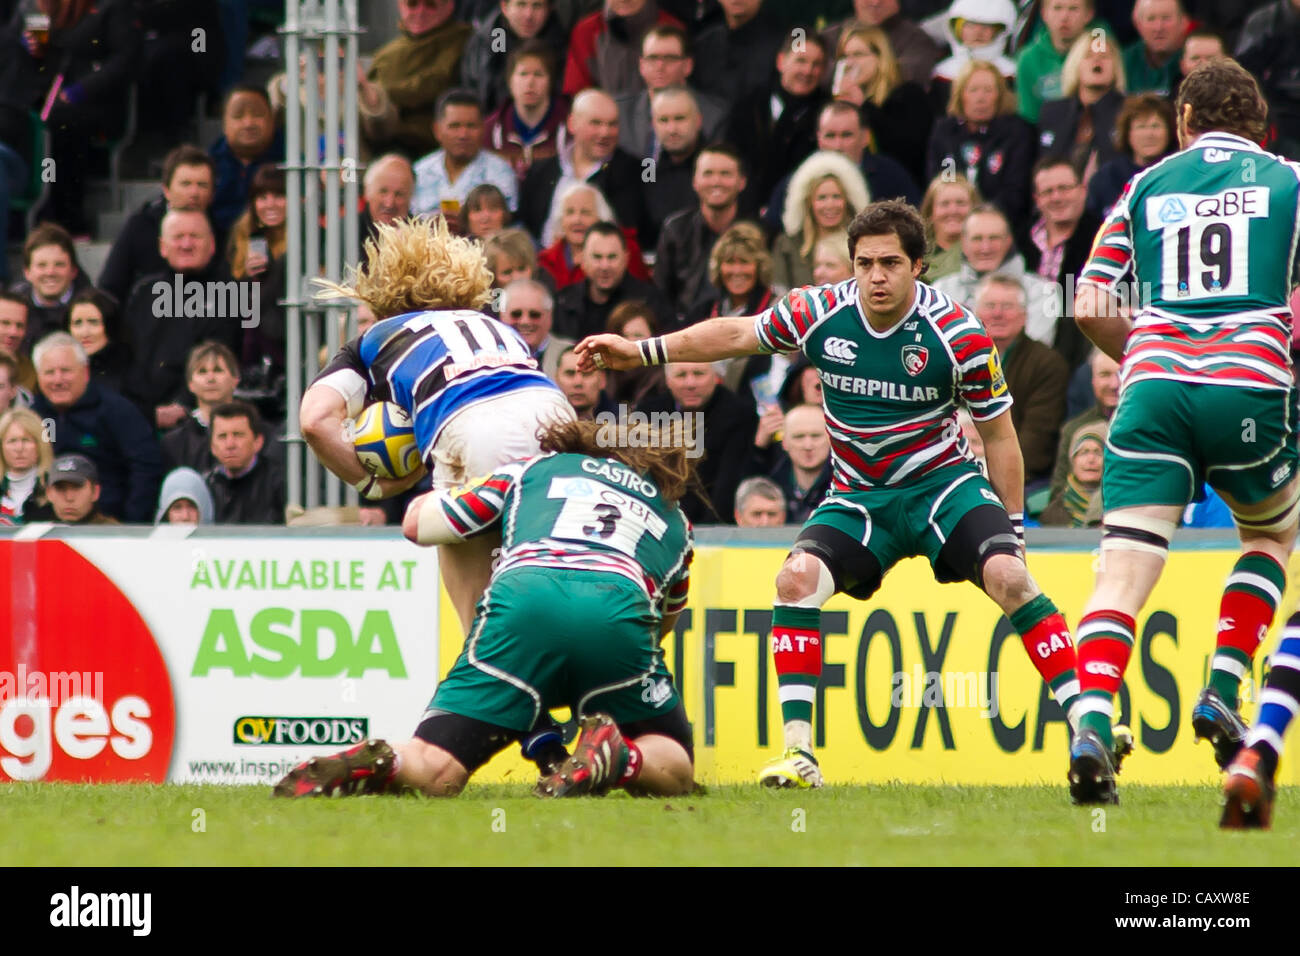 21.04.2012 Leicester, England. Leicester Tigers v Bath Rugby. Martin Castrogiovanni (Leicester Tigers) prevents Tom Biggs (Bath Rugby) from reaching the line during the Premiership Rugby game played at the Welford Road Stadium. Stock Photo